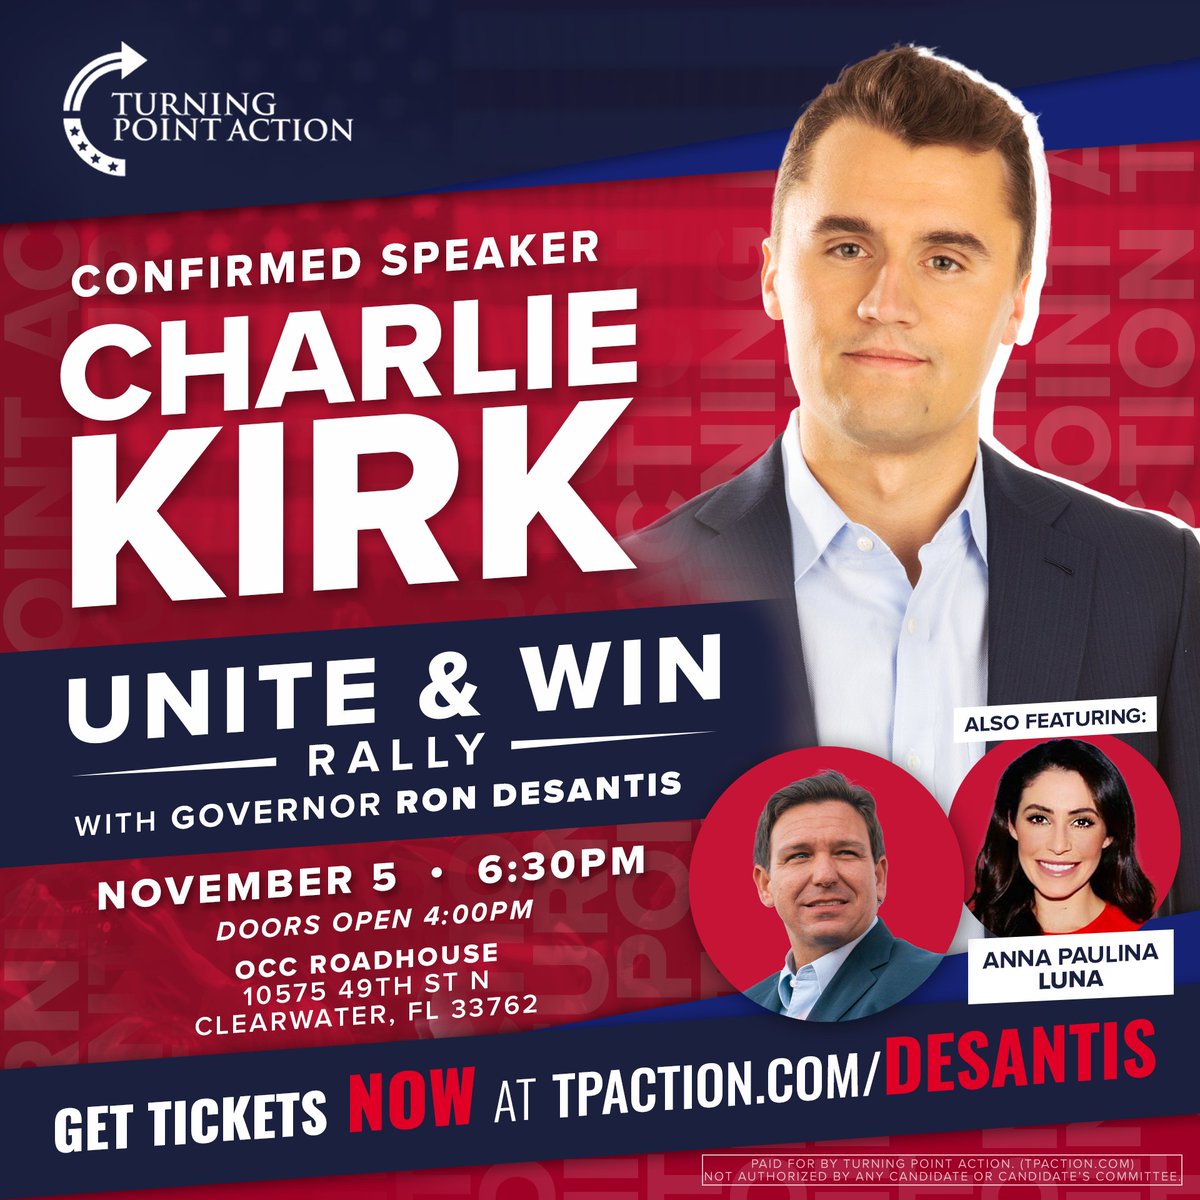 YOU GUYS... this event is gonna be 🔥🔥🔥! Join TONS of freedom-fighting patriots at the upcoming UNITE & WIN rally, featuring amazing speakers including @GovRonDeSantis, @realannapaulina, and @charliekirk11! 🤩🇺🇸 Don't miss out... REGISTER NOW at TPAction.com/DeSantis